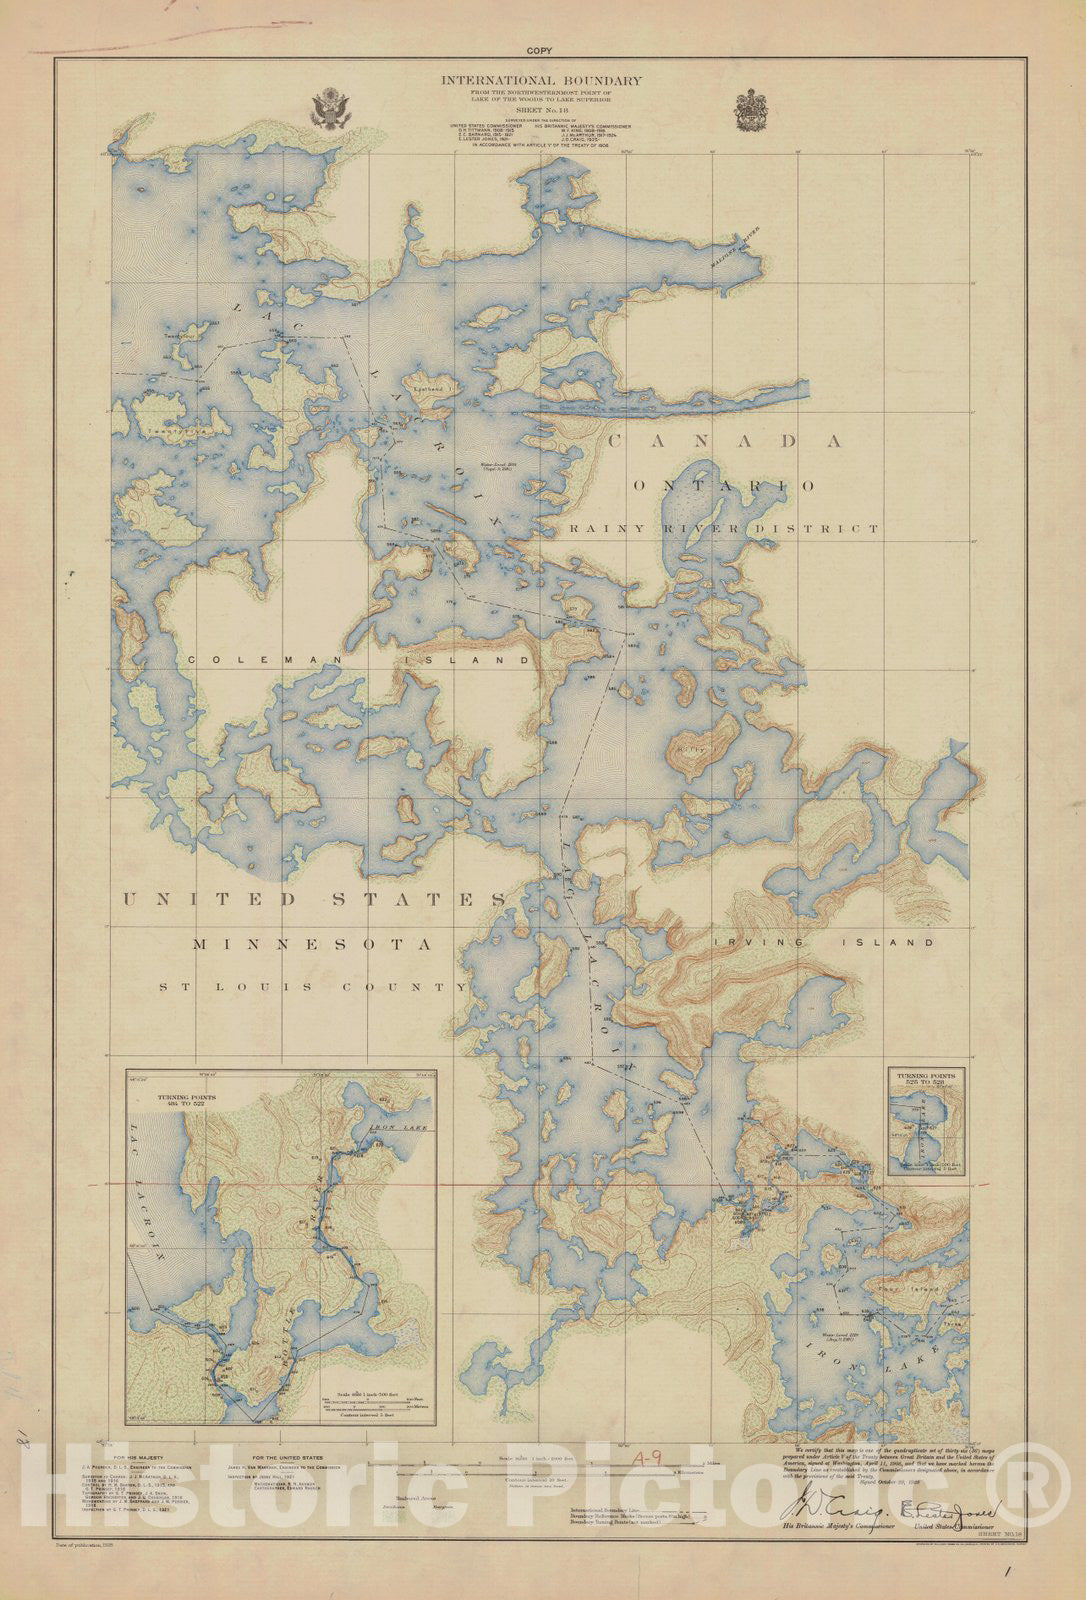 Historic Nautical Map - International Boundary, From The Northwestern Most Point Of Lake Of The Woods To Lake Superior, Sheet No. 18, MN, 1928 NOAA Topographic - Vintage Poster Wall Art Reproduction - 0